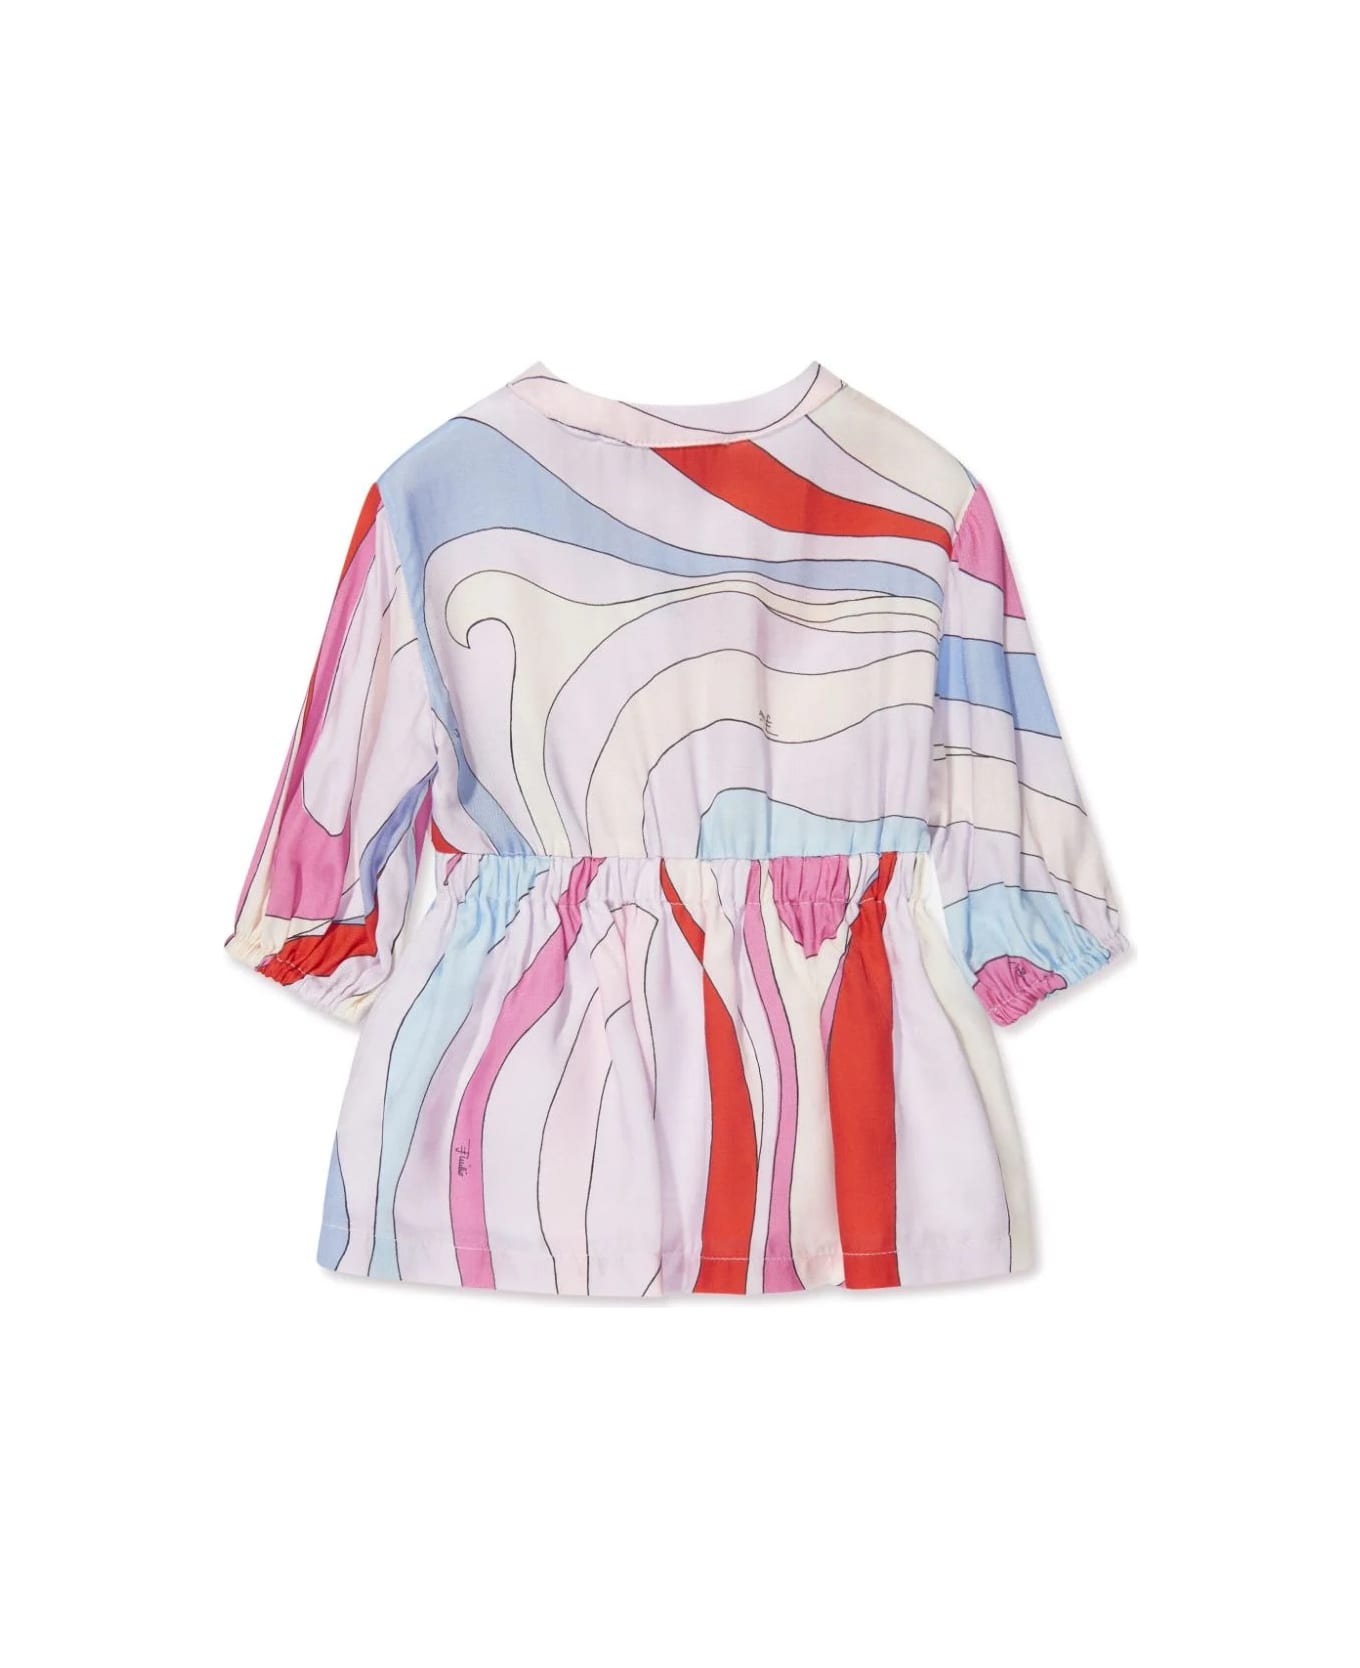 Pucci Shirt Dress With Iride Print In Light Blue/multicolour - Blue ボディスーツ＆セットアップ